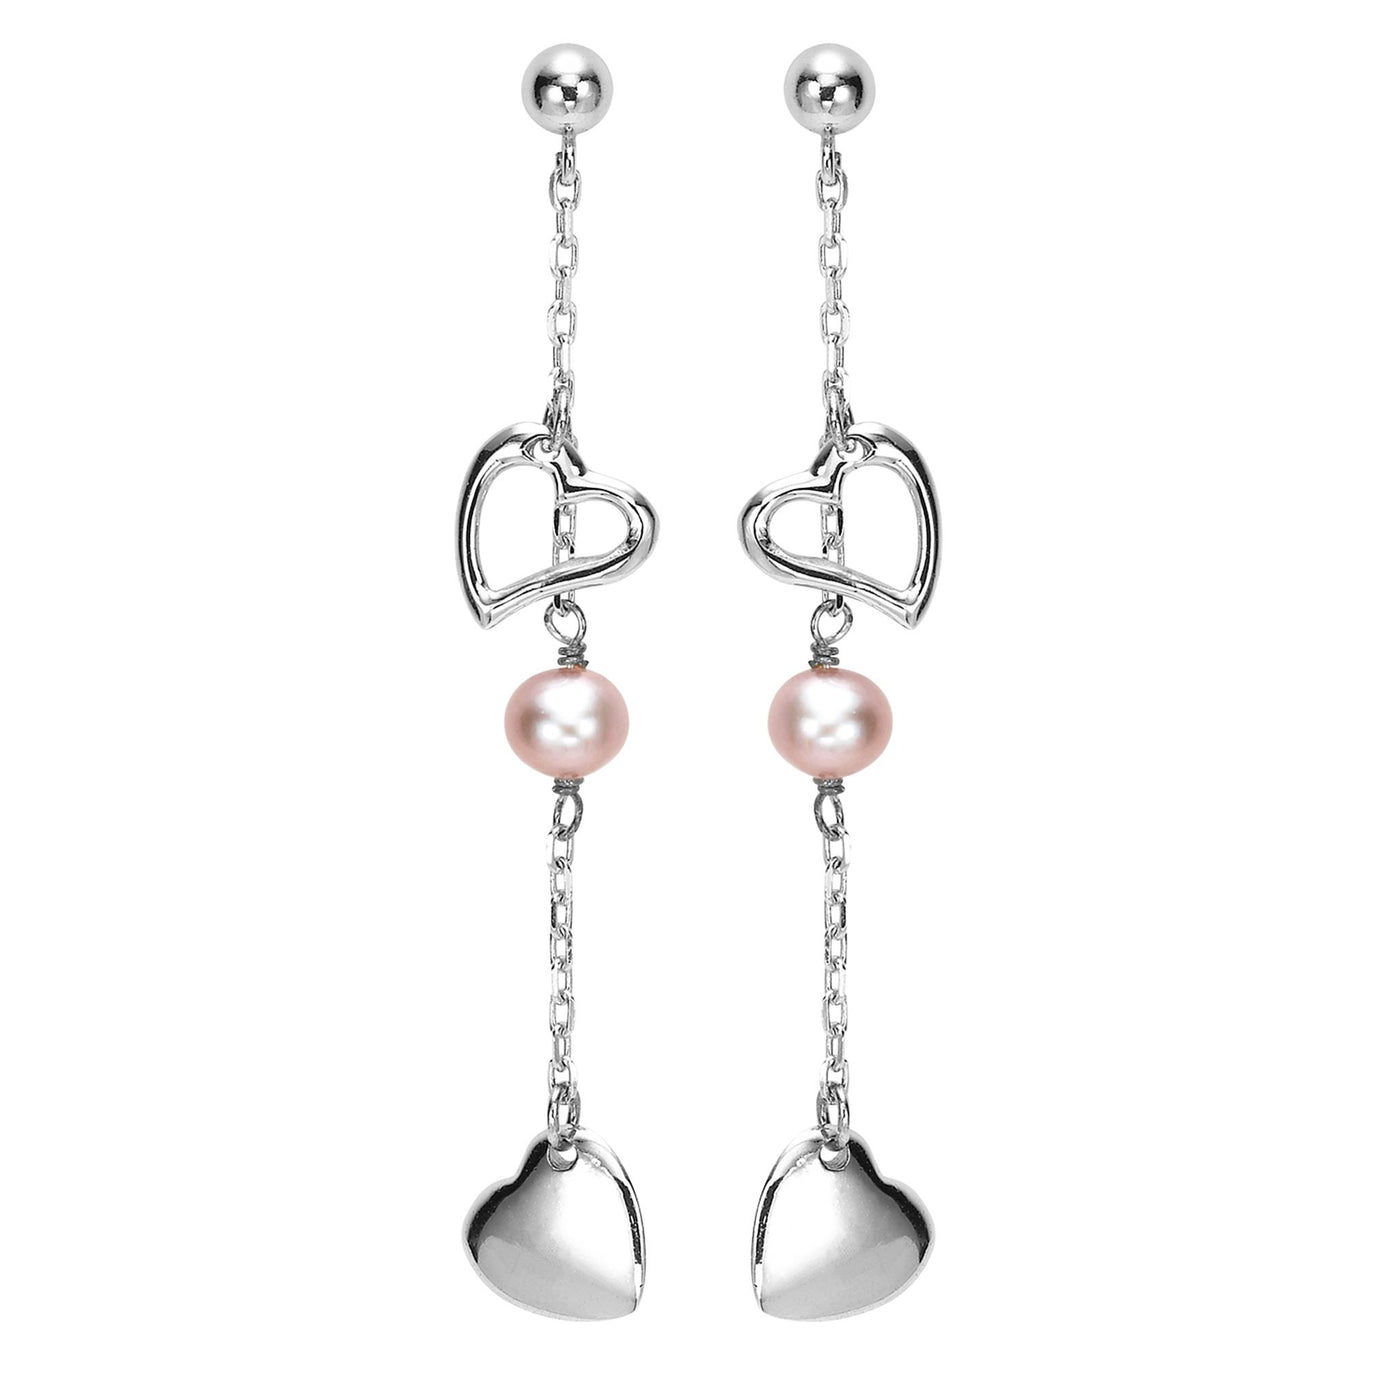 Sterling Silver Dangle Style Earrings Featuring Freshwater Pearls